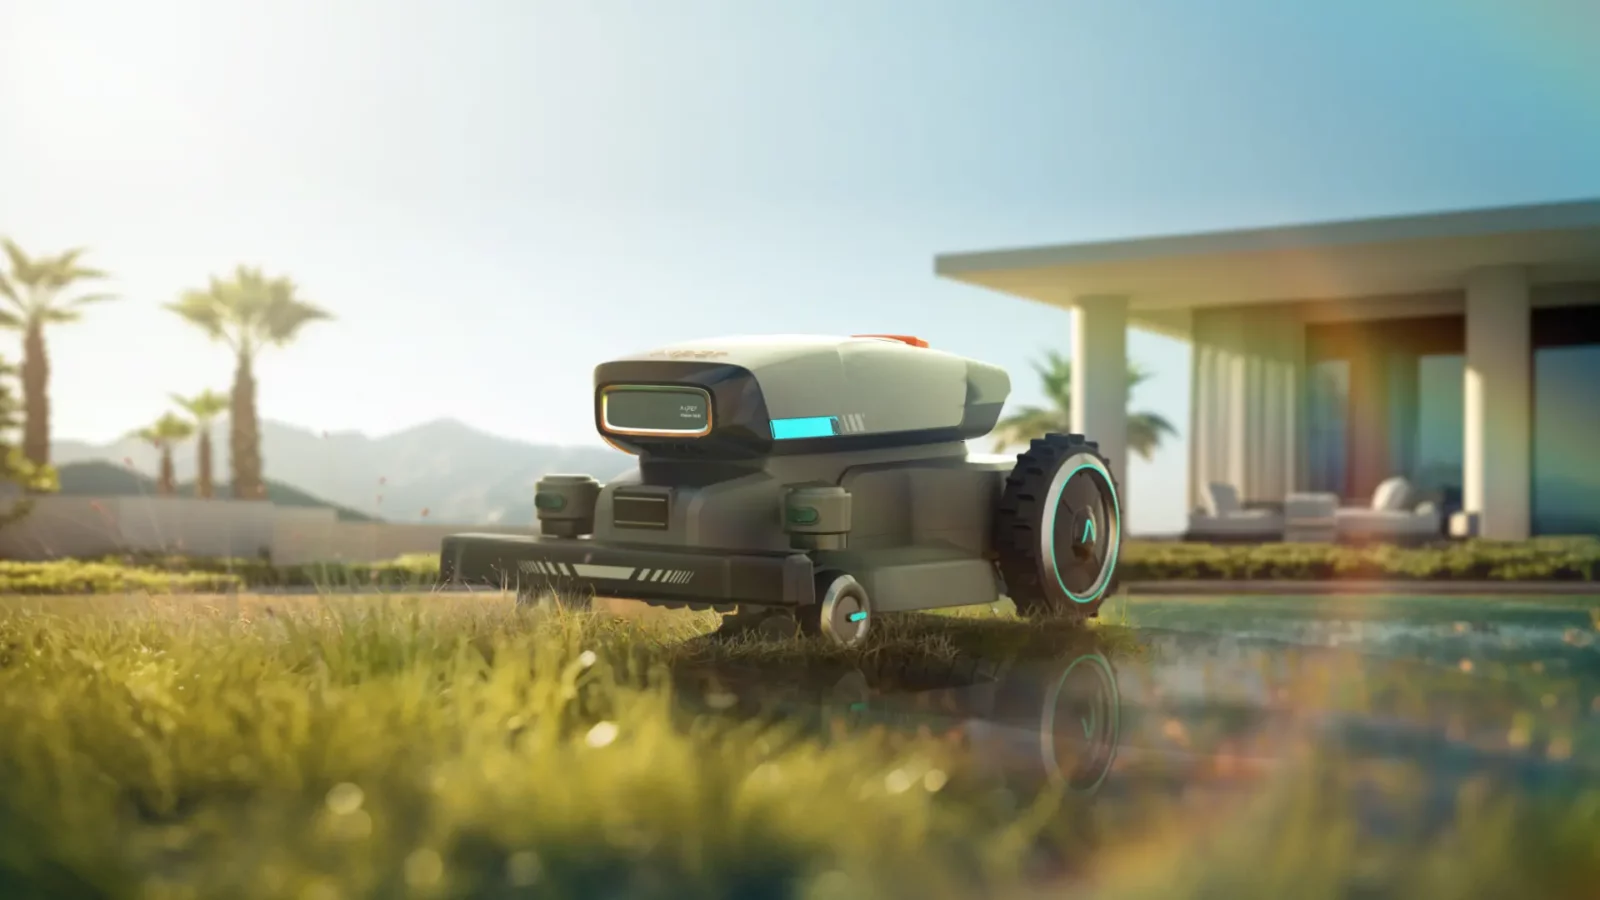 aiper horizon u1 robotic lawn mower mowing the lawn in front of a modern house